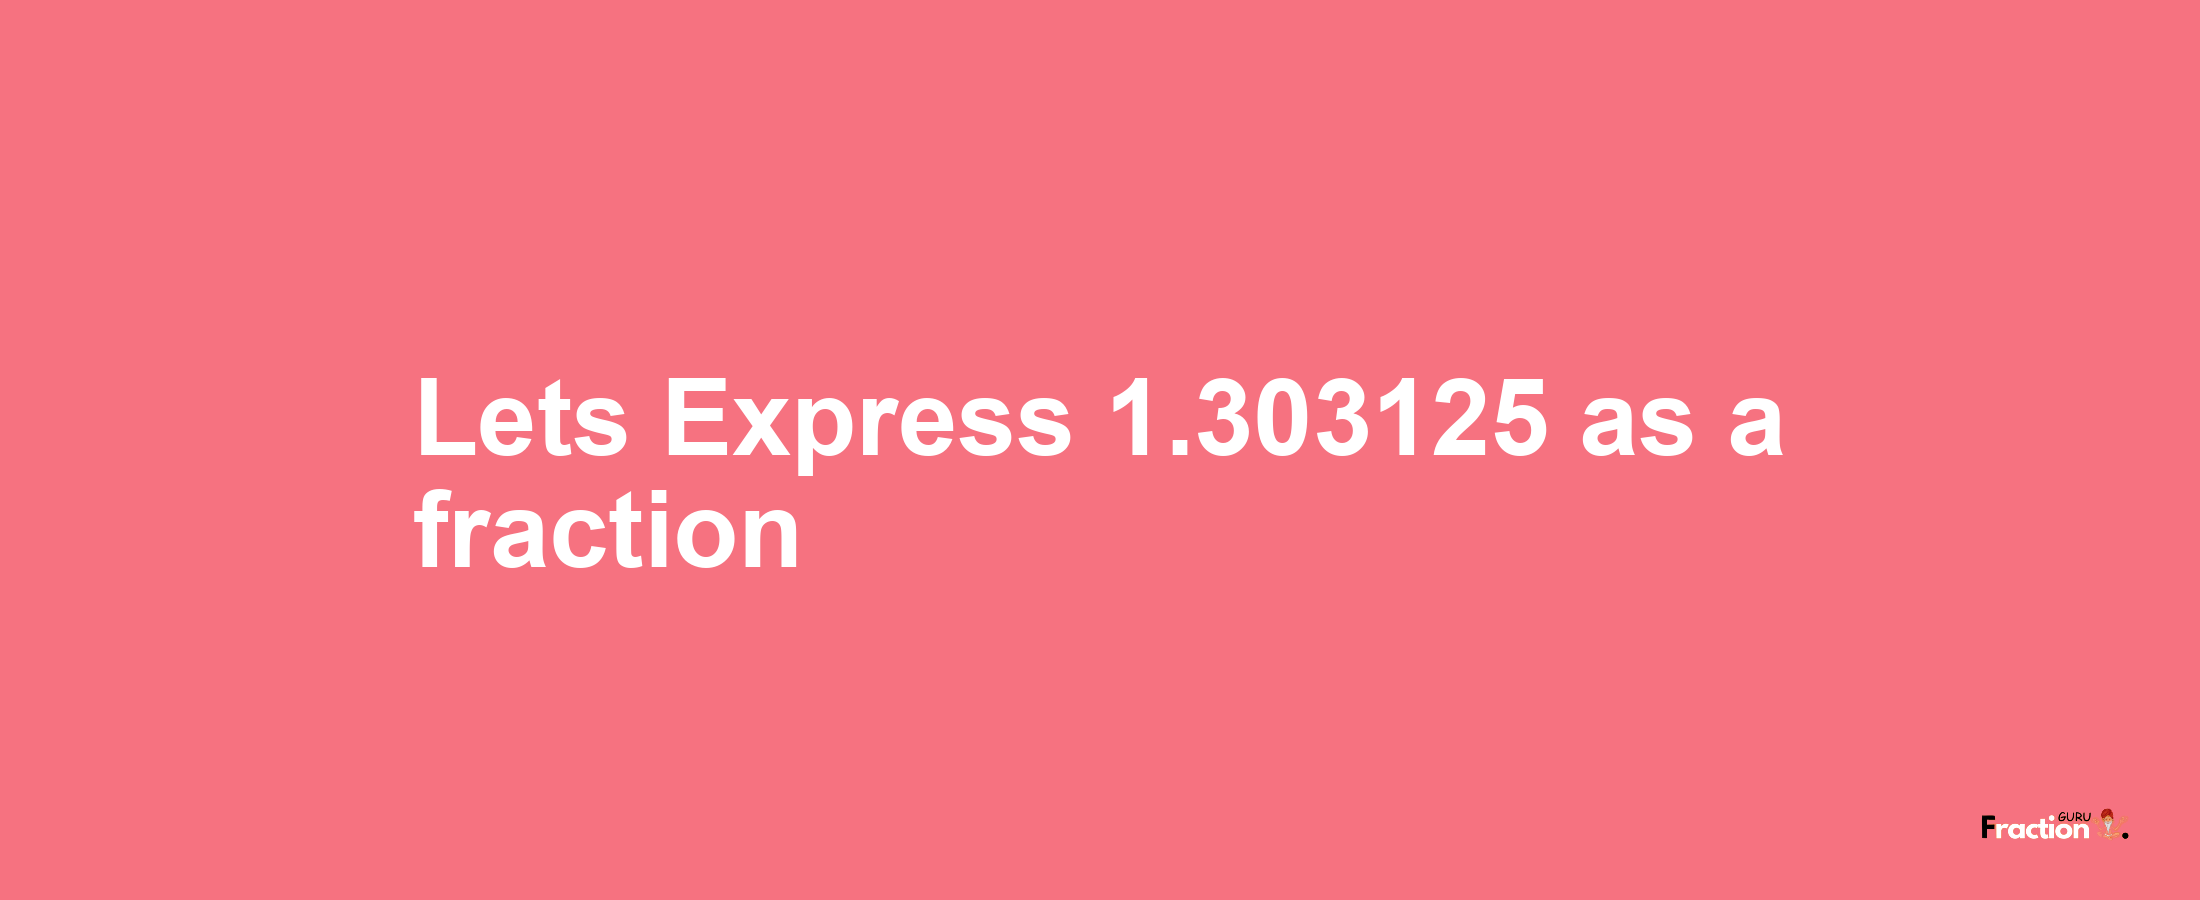 Lets Express 1.303125 as afraction